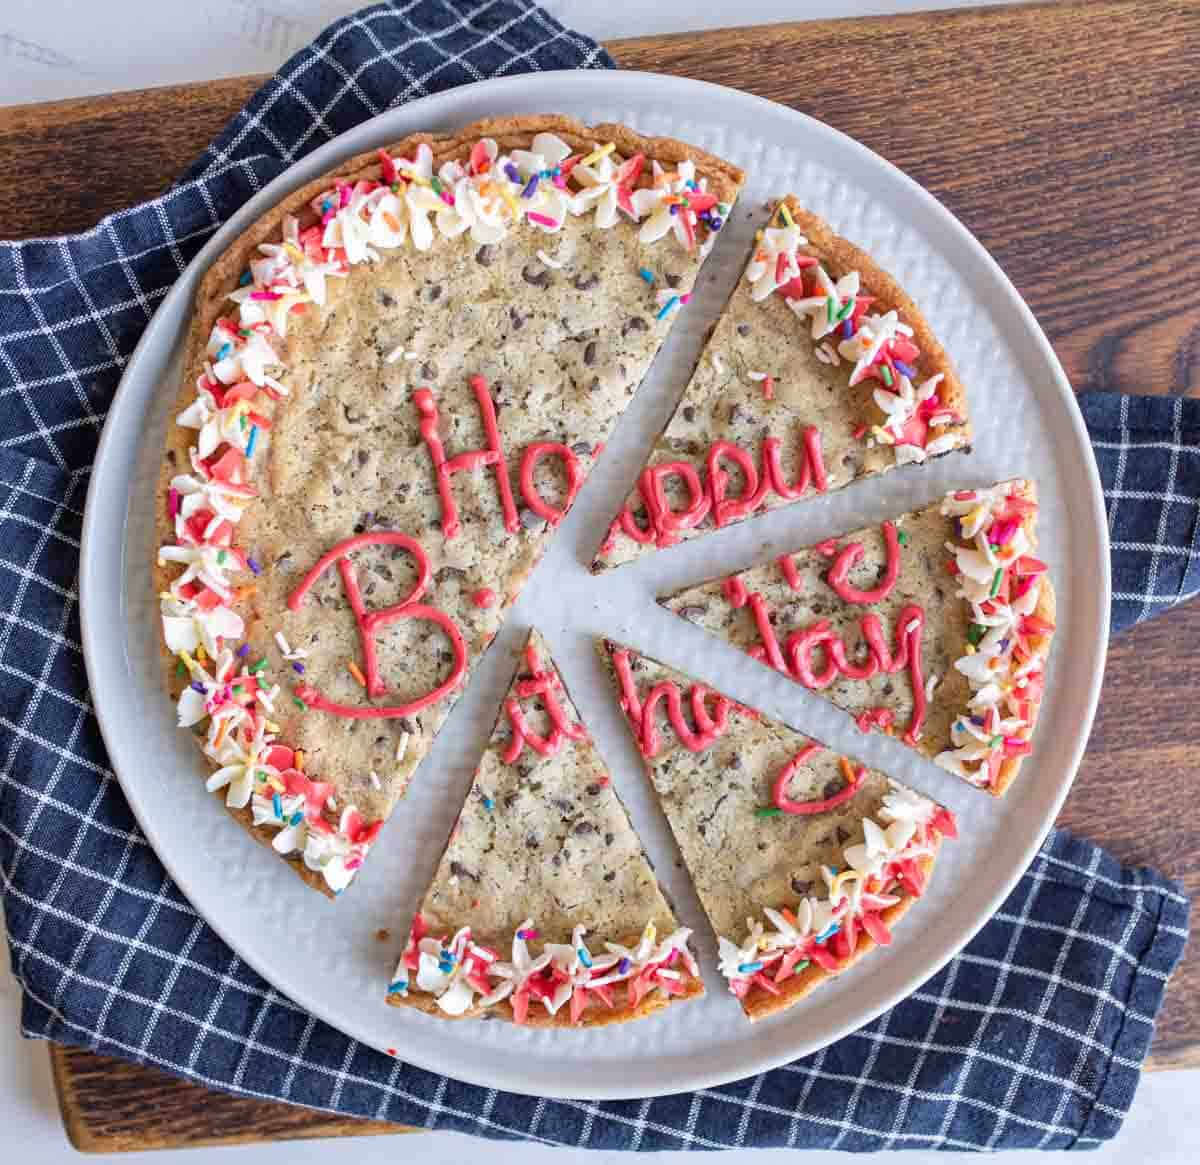 top view of a alarge round chocolate chip cookie cake with birthday decorations sliced